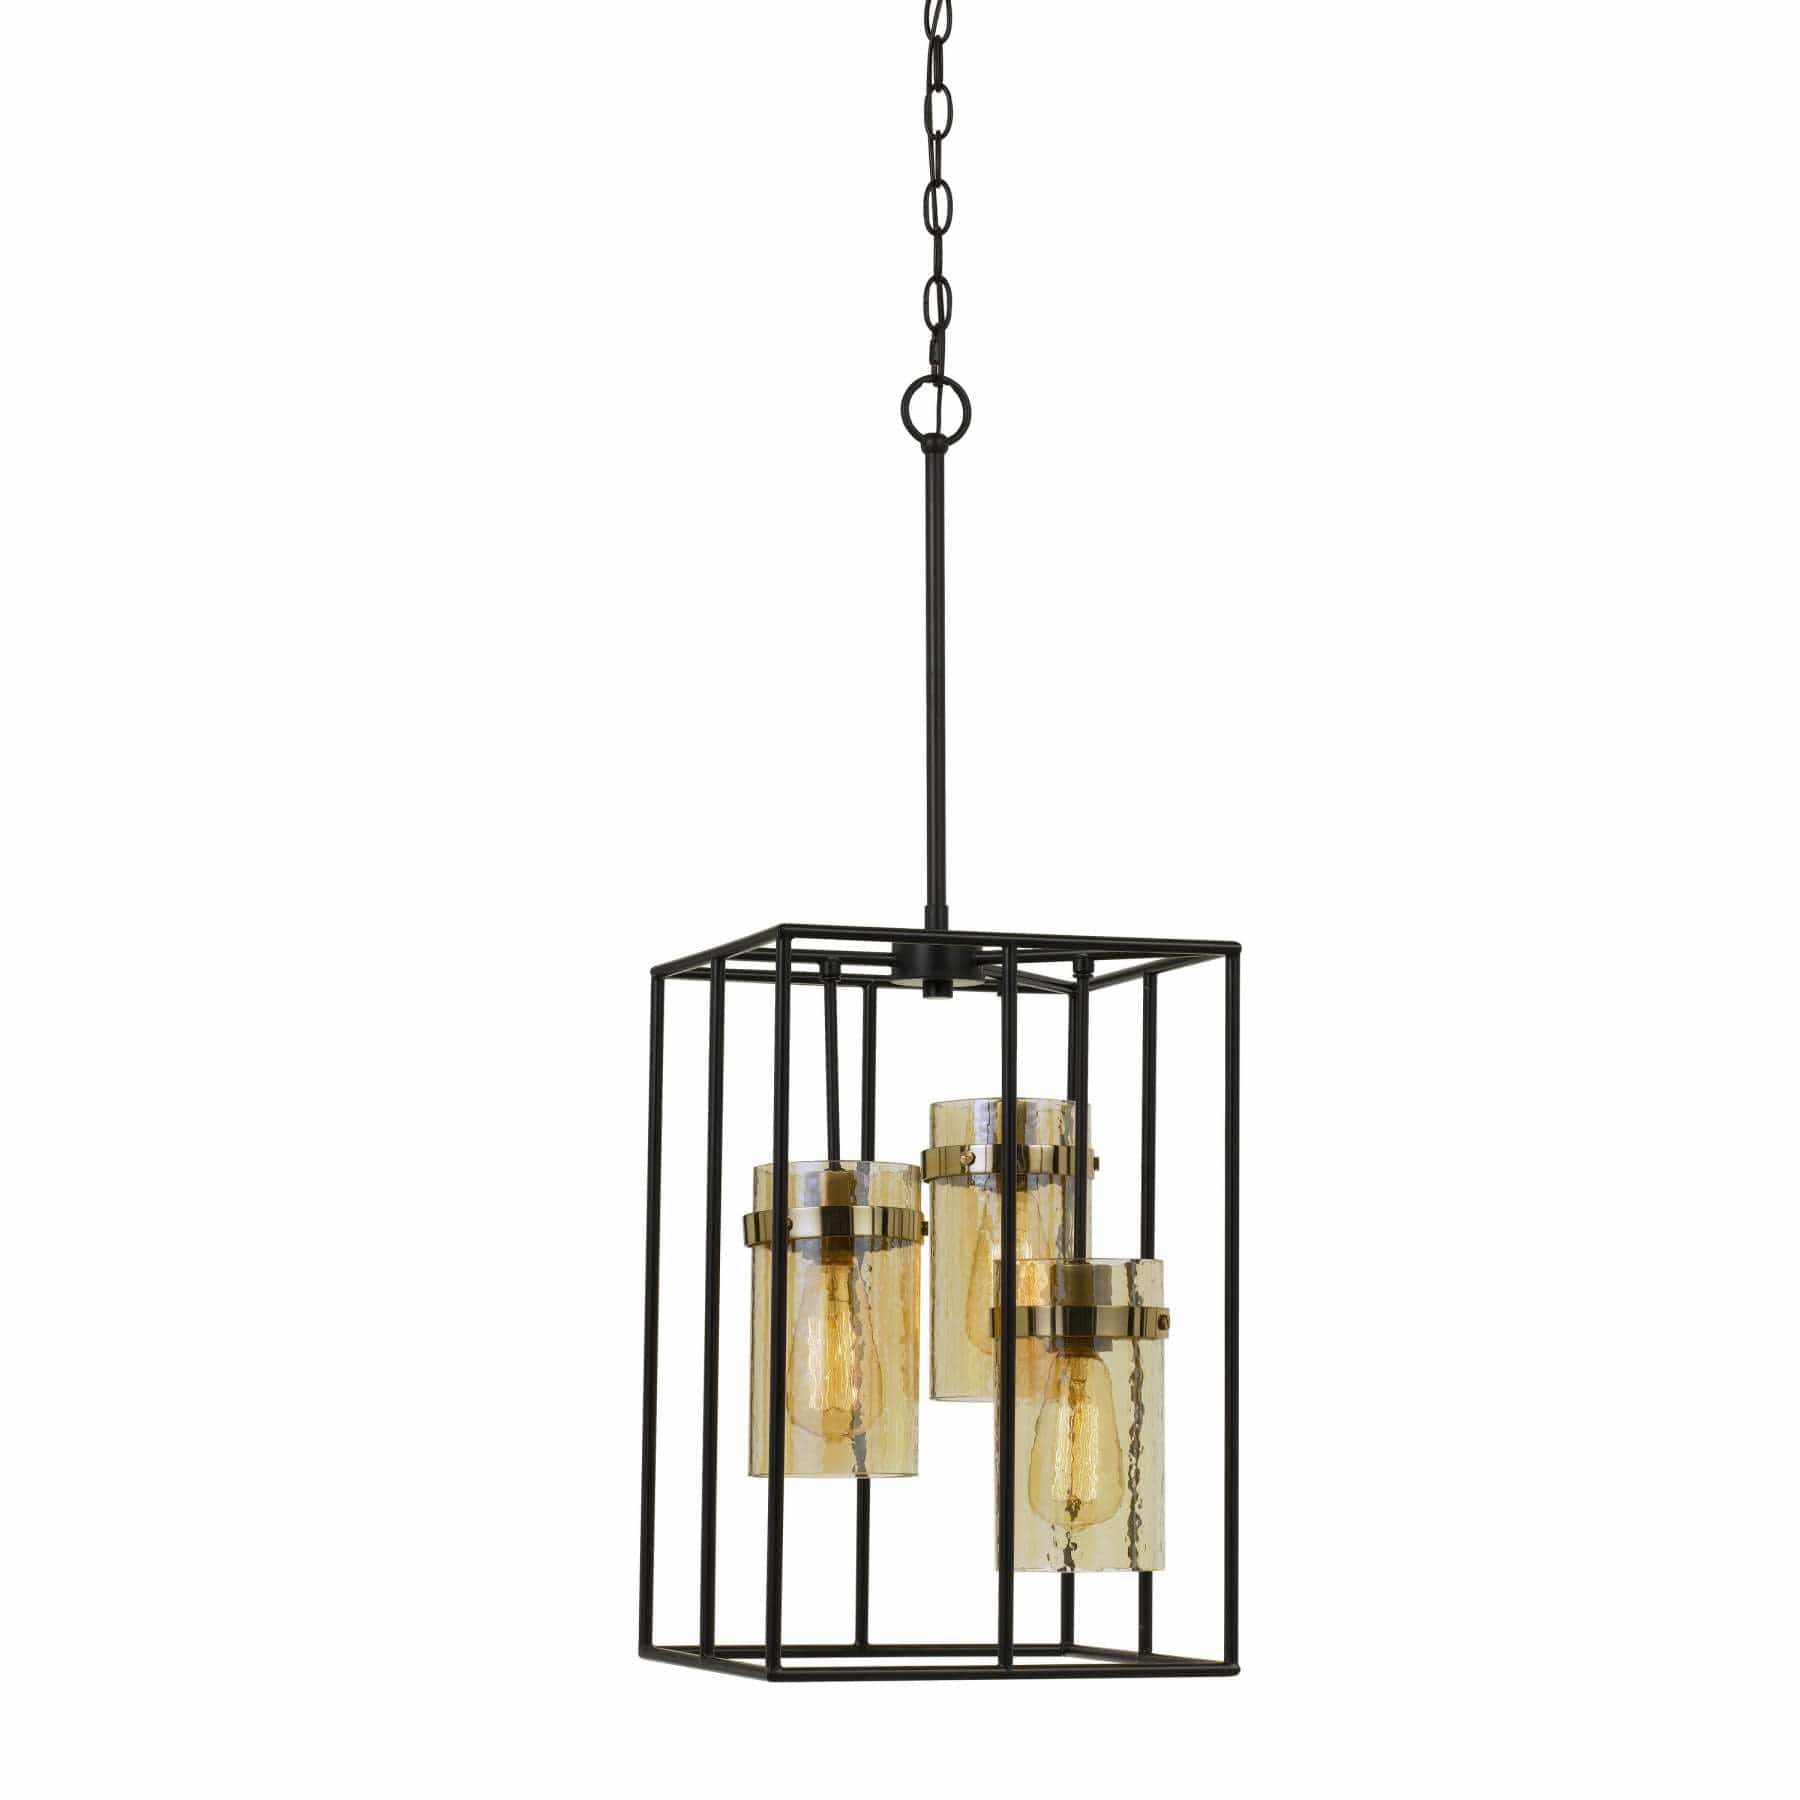 Benzara Rectangular Open Cage Design Pendant With Cylindrical Glass Shade, Black By Benzara Chandeliers BM224818